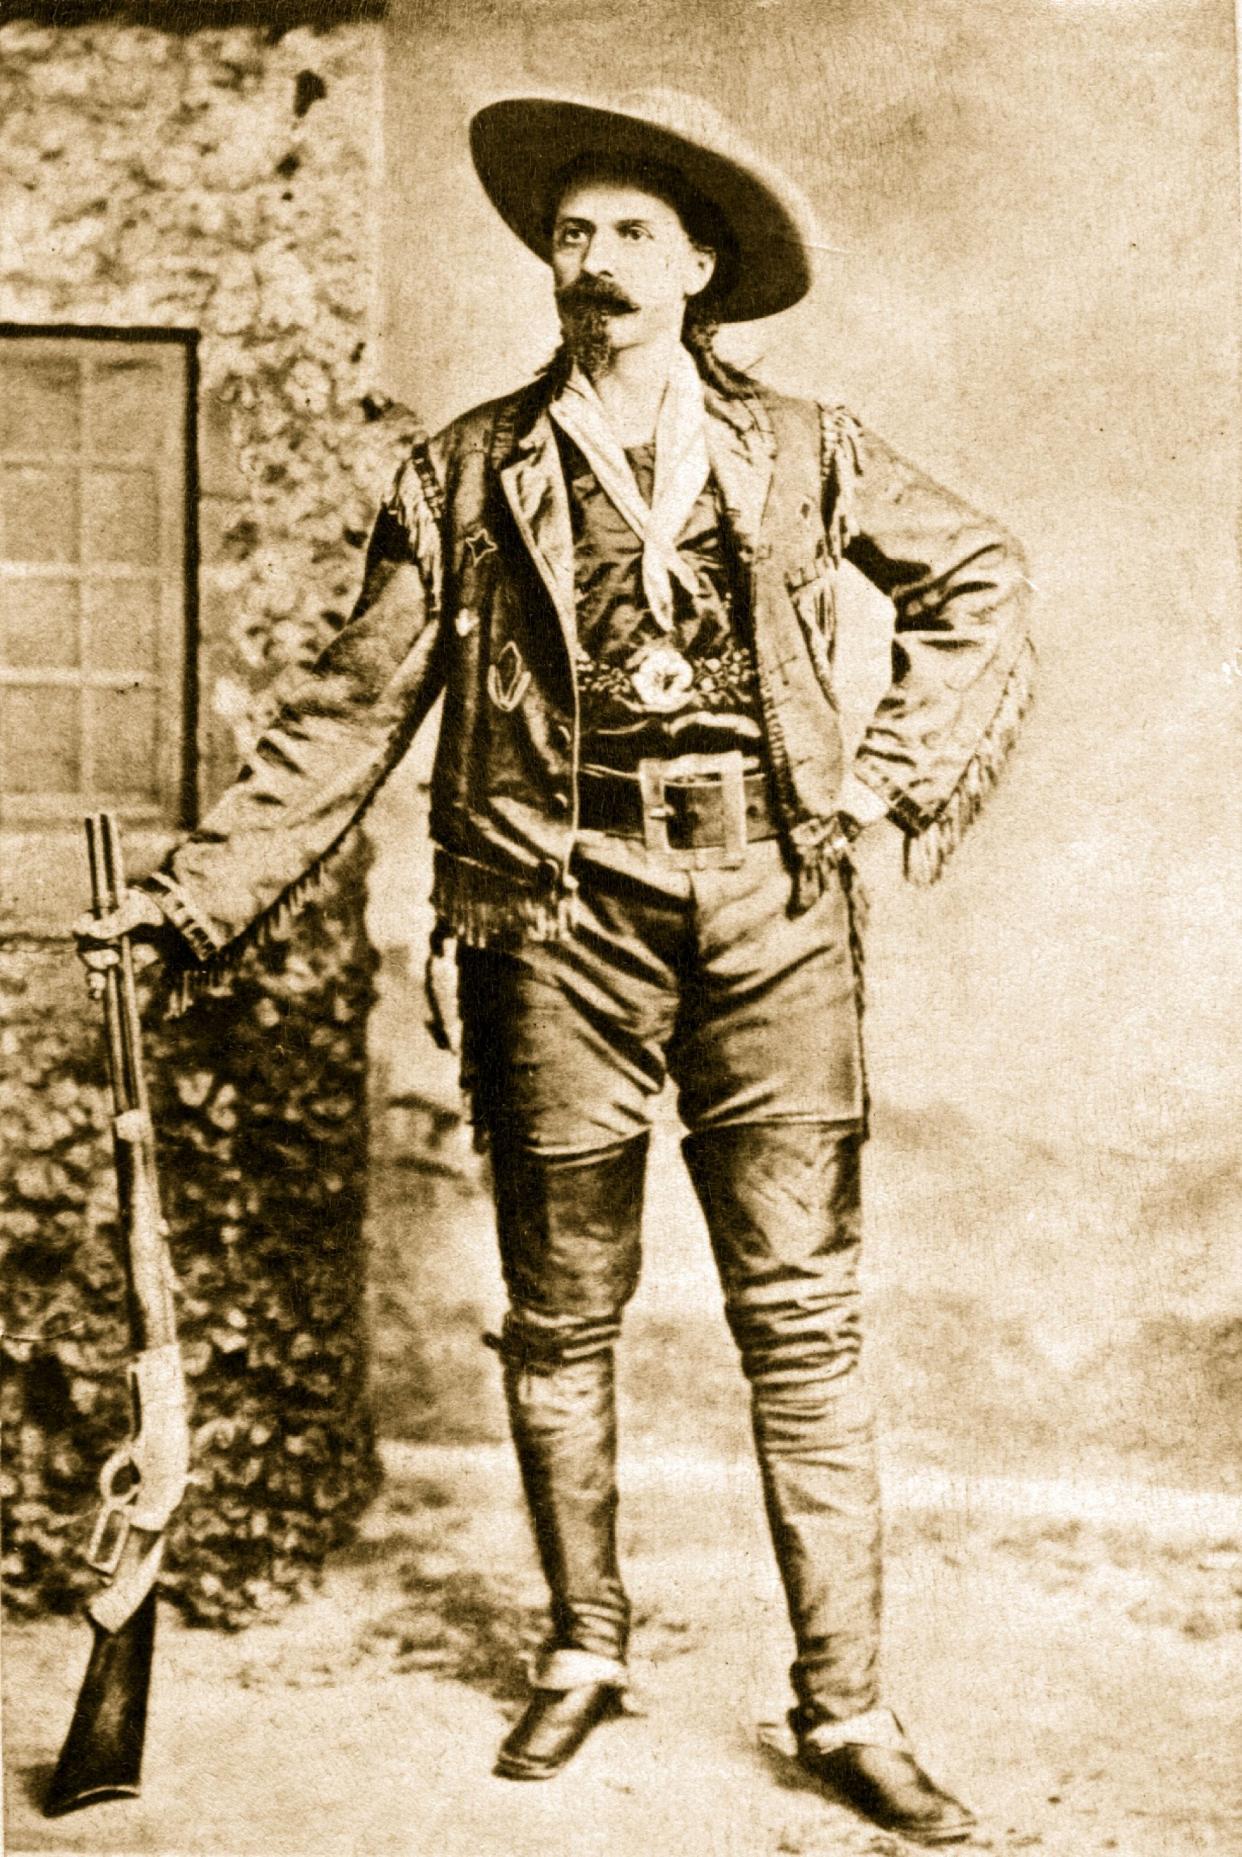 William Frederick Cody (1846 - 1917) better known as 'Buffalo Bill', American scout, pony express rider and showman. (Photo by Hulton Archive/Getty Images)